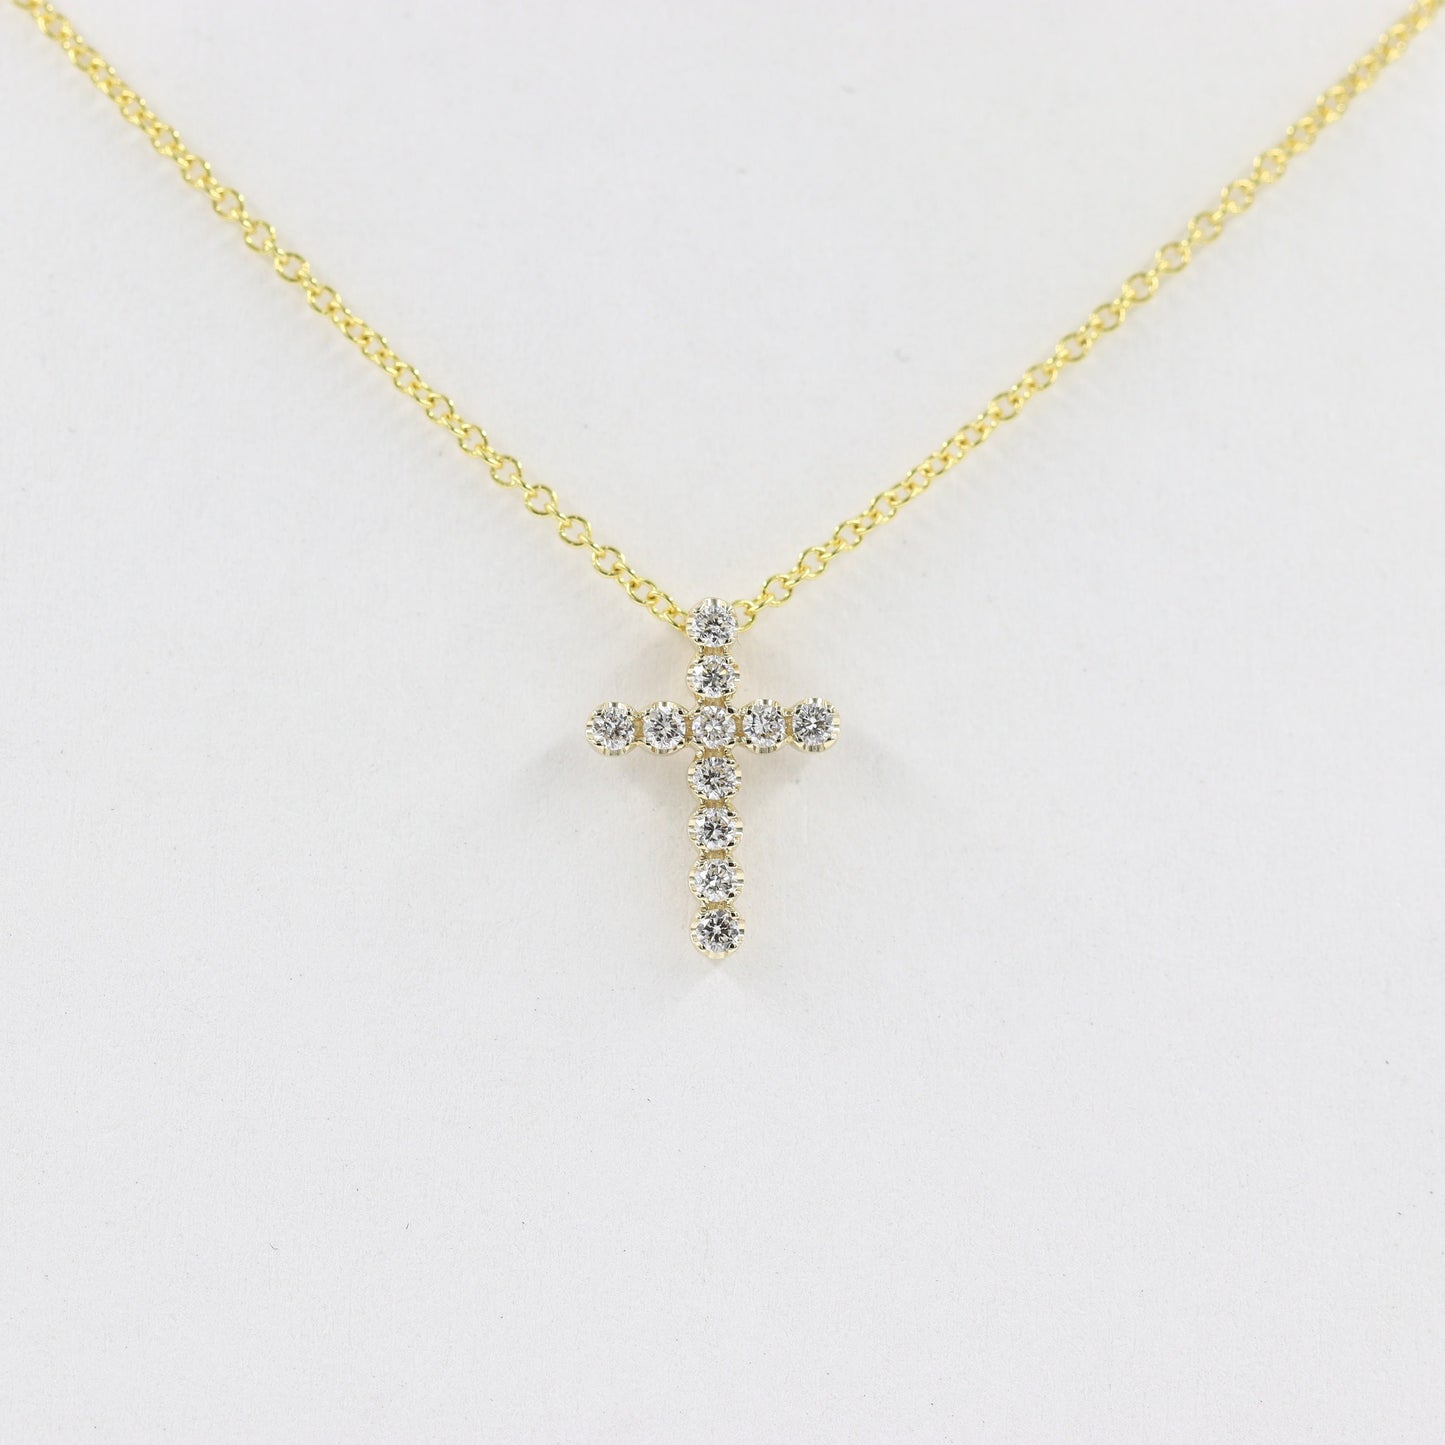 Round Diamond Necklace / Dainty Simple small Cross Necklace / Adjustable Length /14K Gold 0.1ct Diamond Cross Necklace / Gift for Her